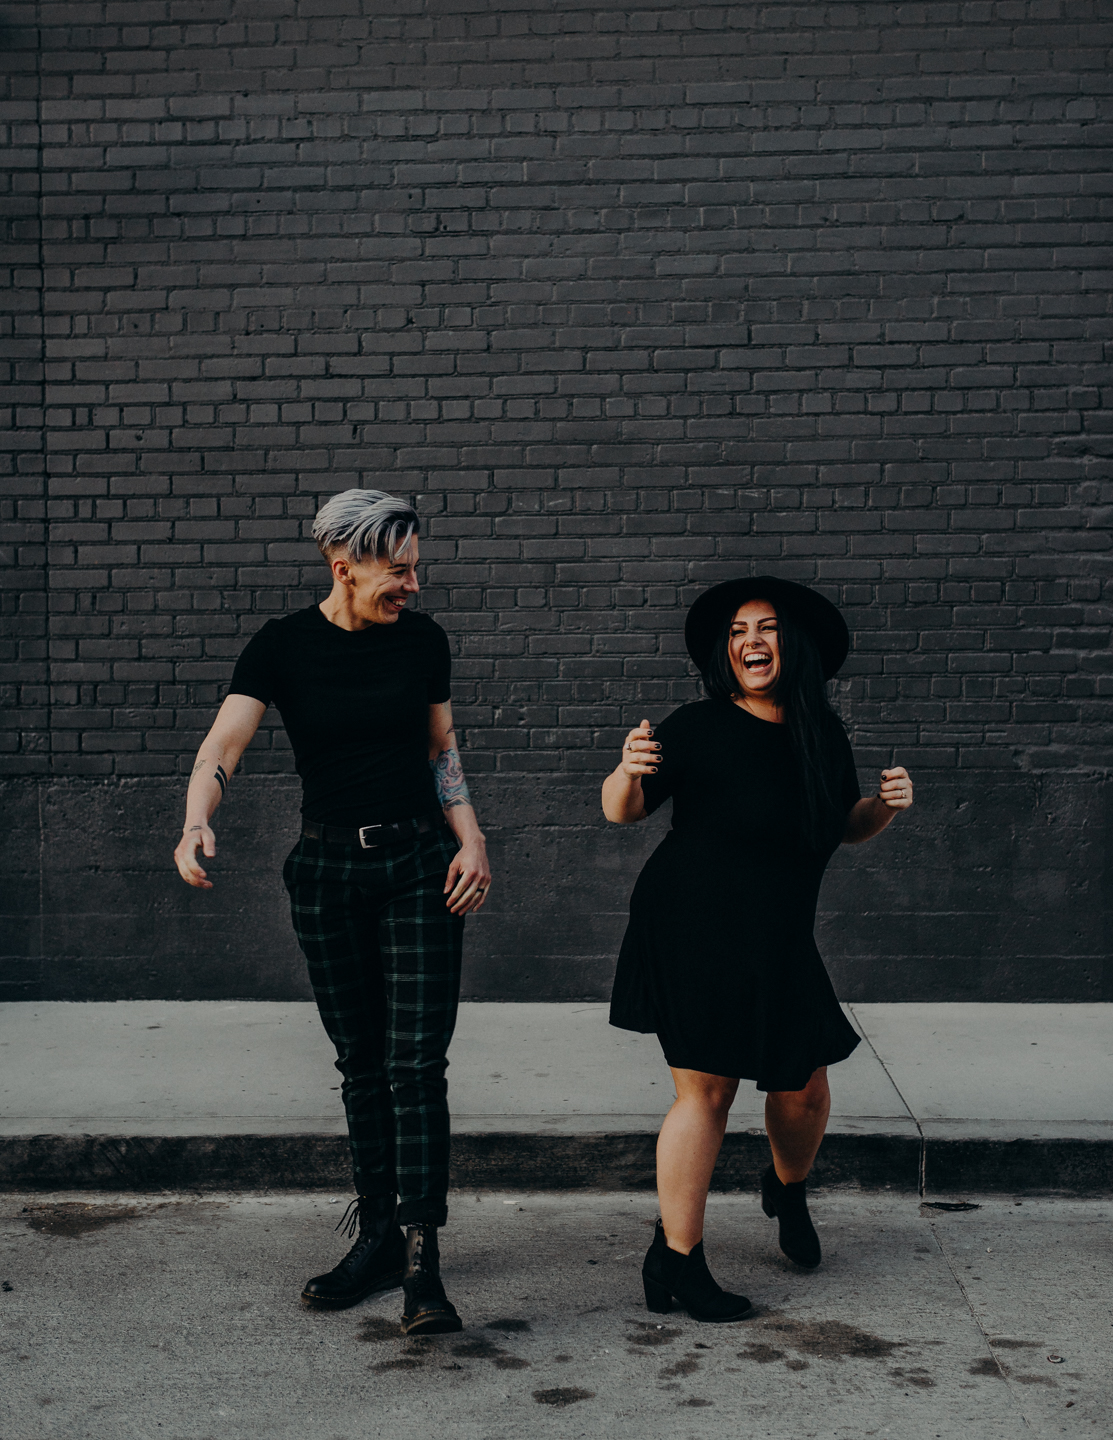 queer wedding photographer in los angeles - lesbian engagement session los angeles - isaiahandtaylor.com-036.jpg